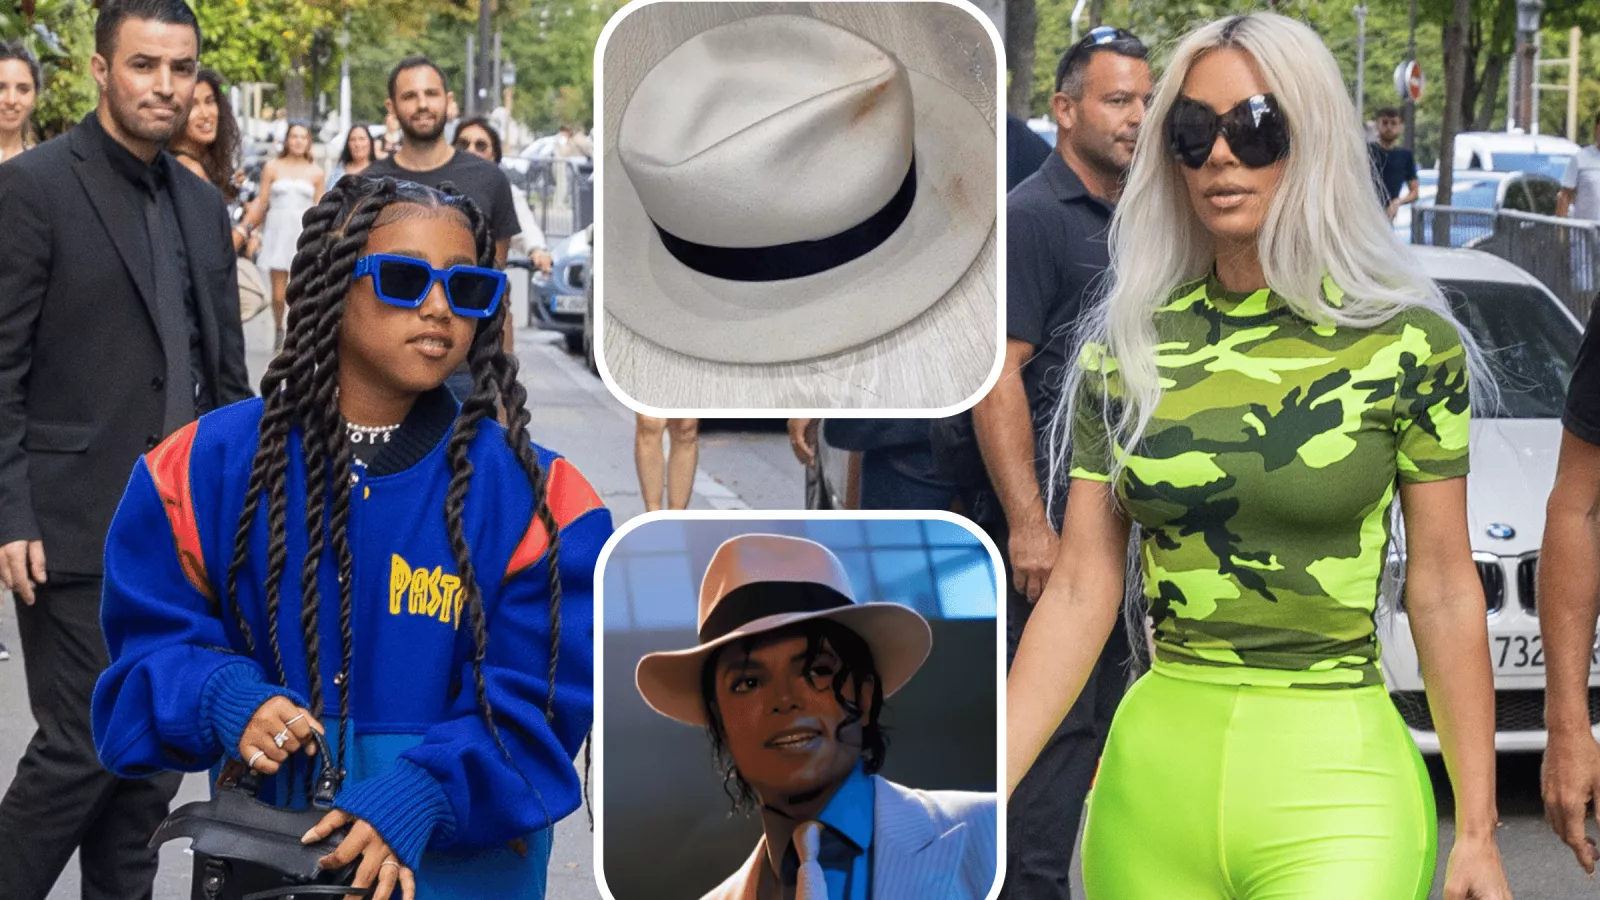 Disbelief as North West Wears Michael Jackson's Real 'Smooth Criminal' Hat